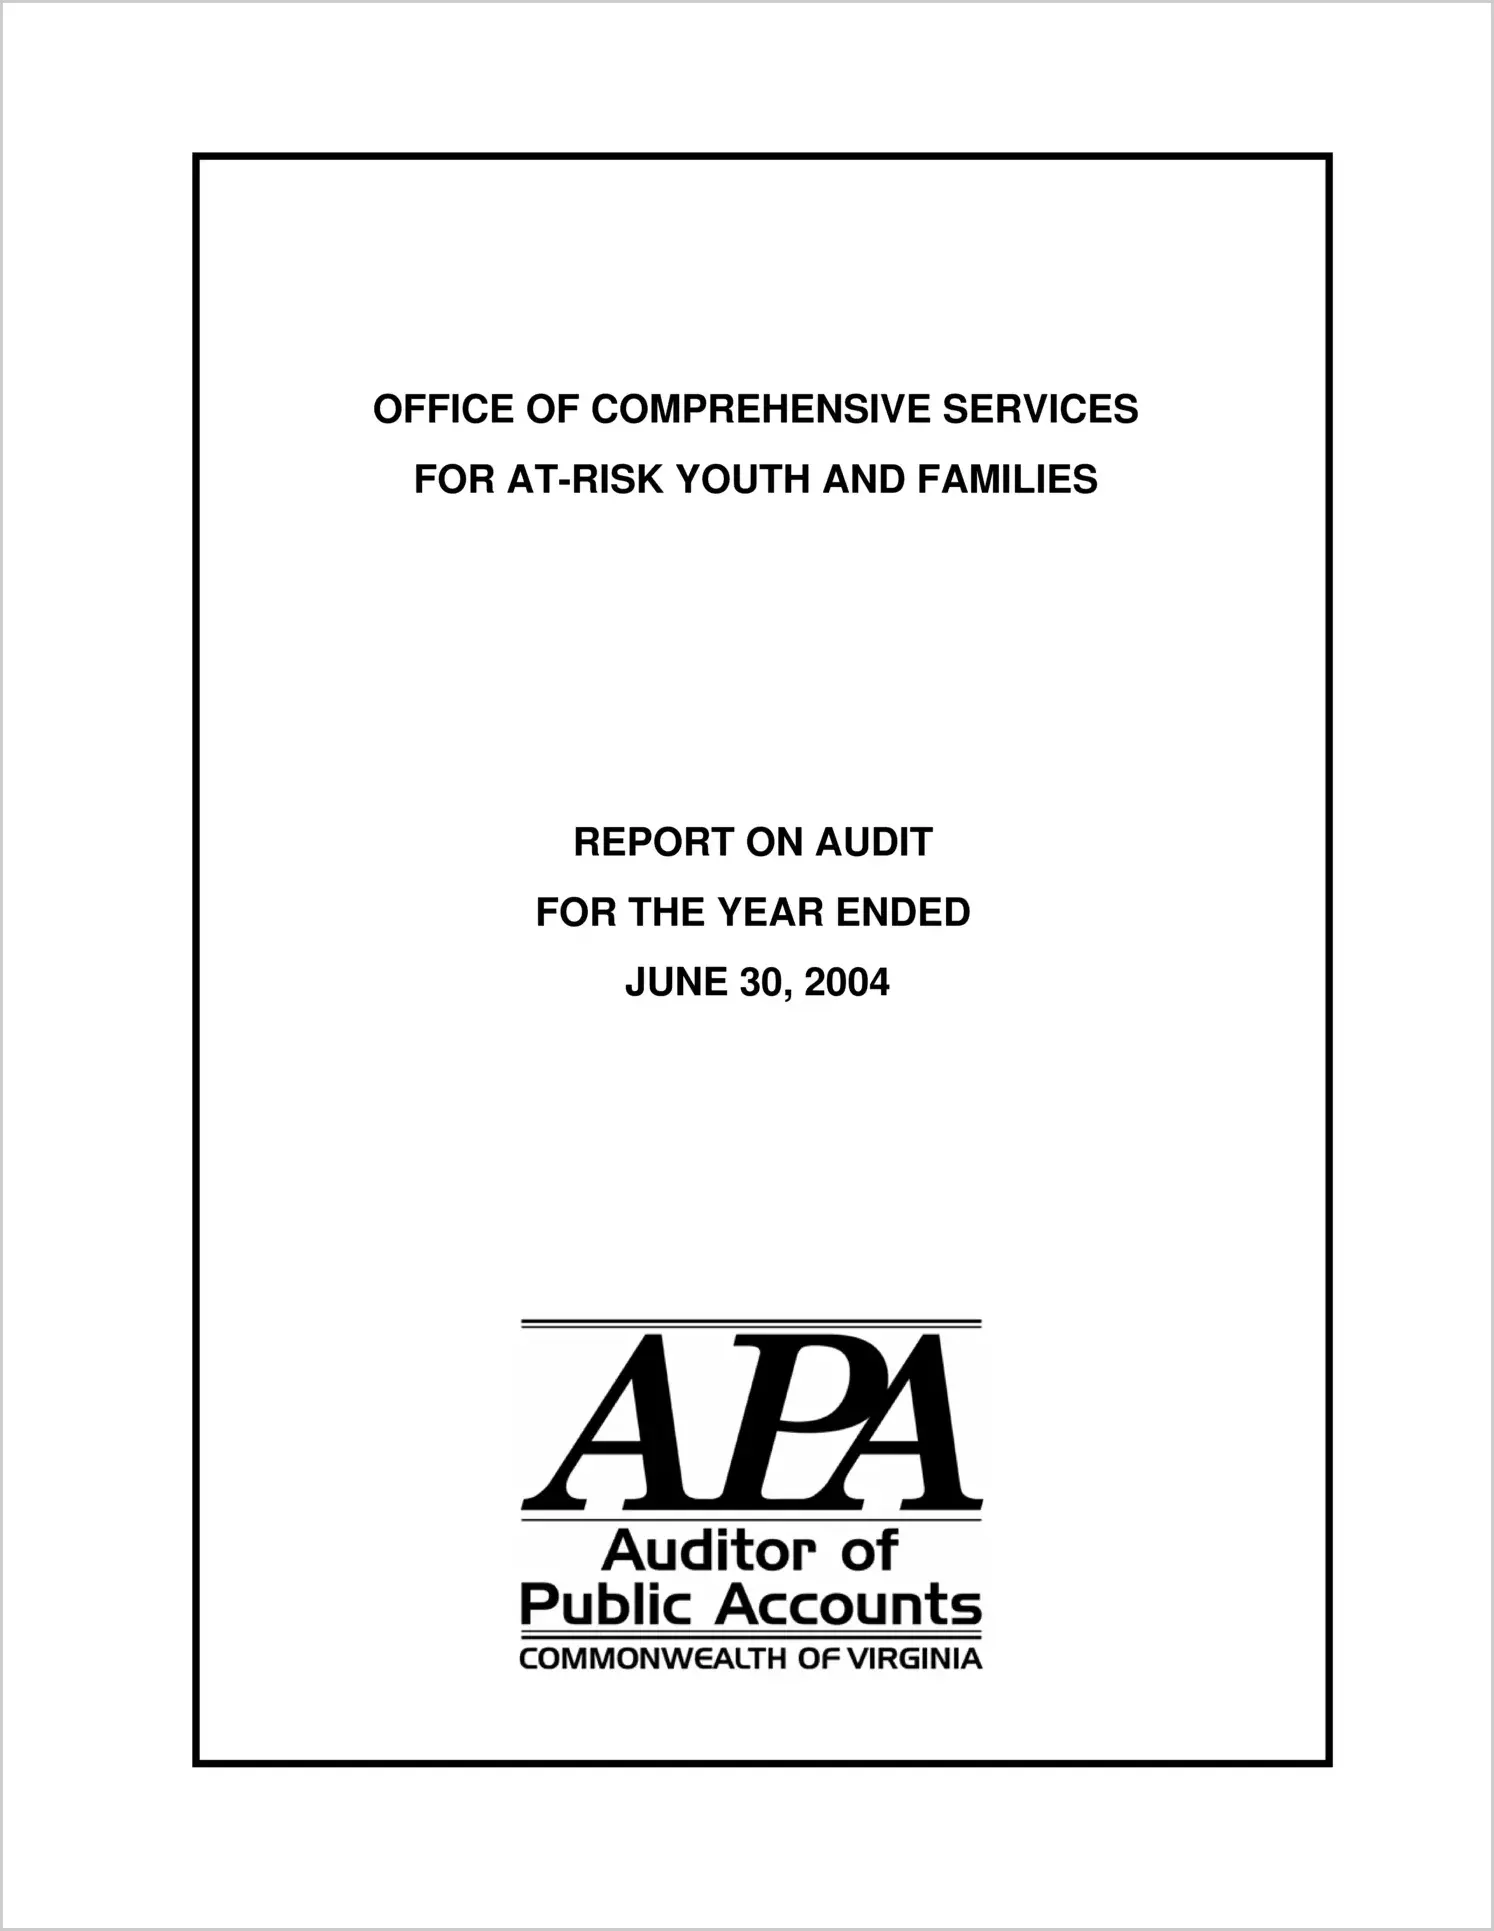 Office of Comprehensive Services for At-Risk Youth and Families for the year ended June 30, 2004